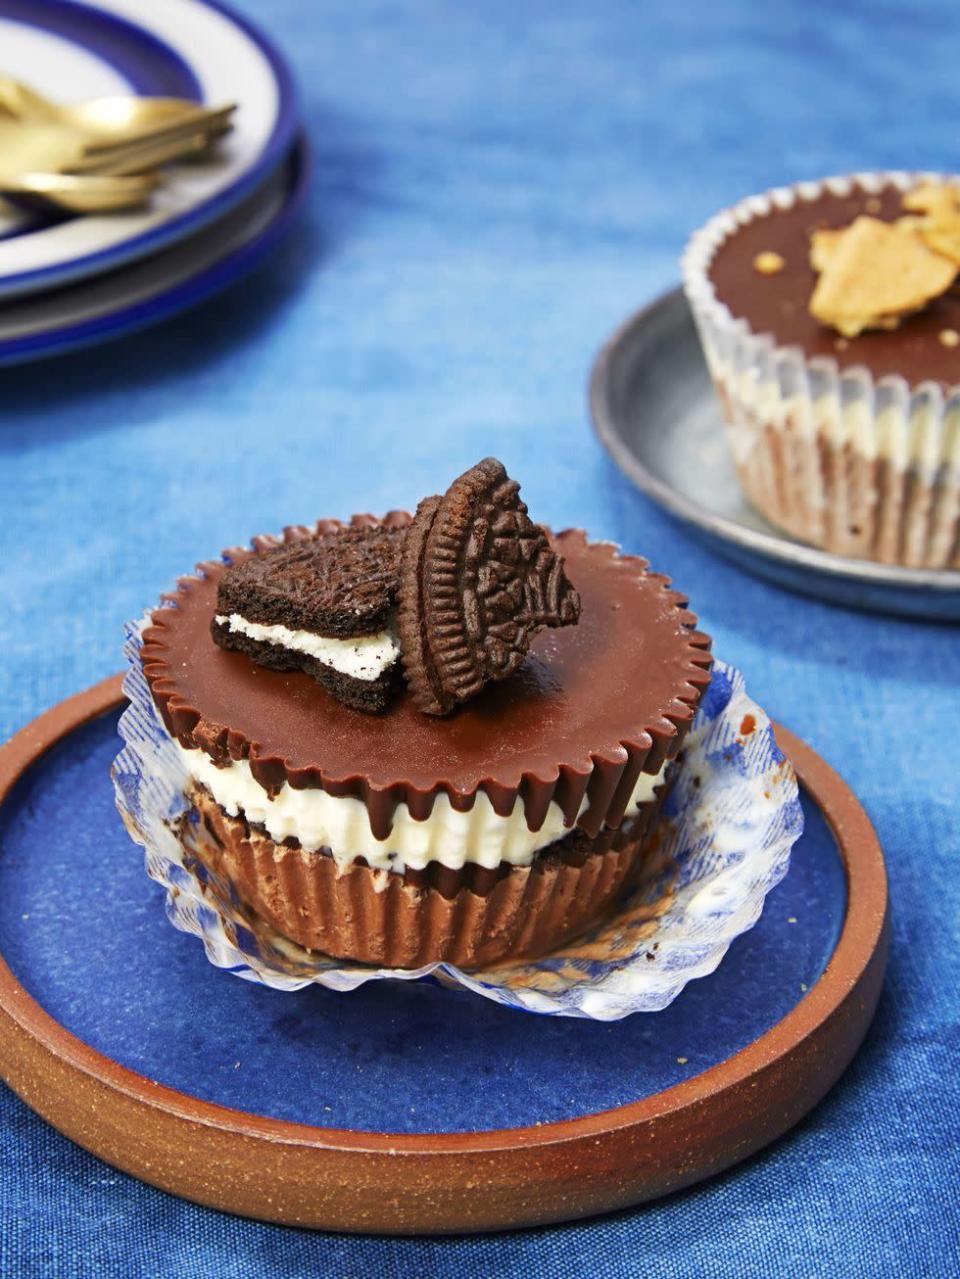 <p>Turn this no-bake, DIY dessert into a family activity by letting the kids help layer your ice cream and cookies of choice.</p><p>Get the <strong><a href="https://www.goodhousekeeping.com/food-recipes/a32709/ice-cream-cupcakes/" rel="nofollow noopener" target="_blank" data-ylk="slk:Ice Cream Cupcakes recipe" class="link ">Ice Cream Cupcakes recipe</a></strong>. </p><p><strong>RELATED:</strong> <a href="https://www.goodhousekeeping.com/food-recipes/dessert/g838/no-bake-desserts/" rel="nofollow noopener" target="_blank" data-ylk="slk:16 Ridiculously Easy No-Bake Desserts to Try ASAP" class="link ">16 Ridiculously Easy No-Bake Desserts to Try ASAP</a></p>